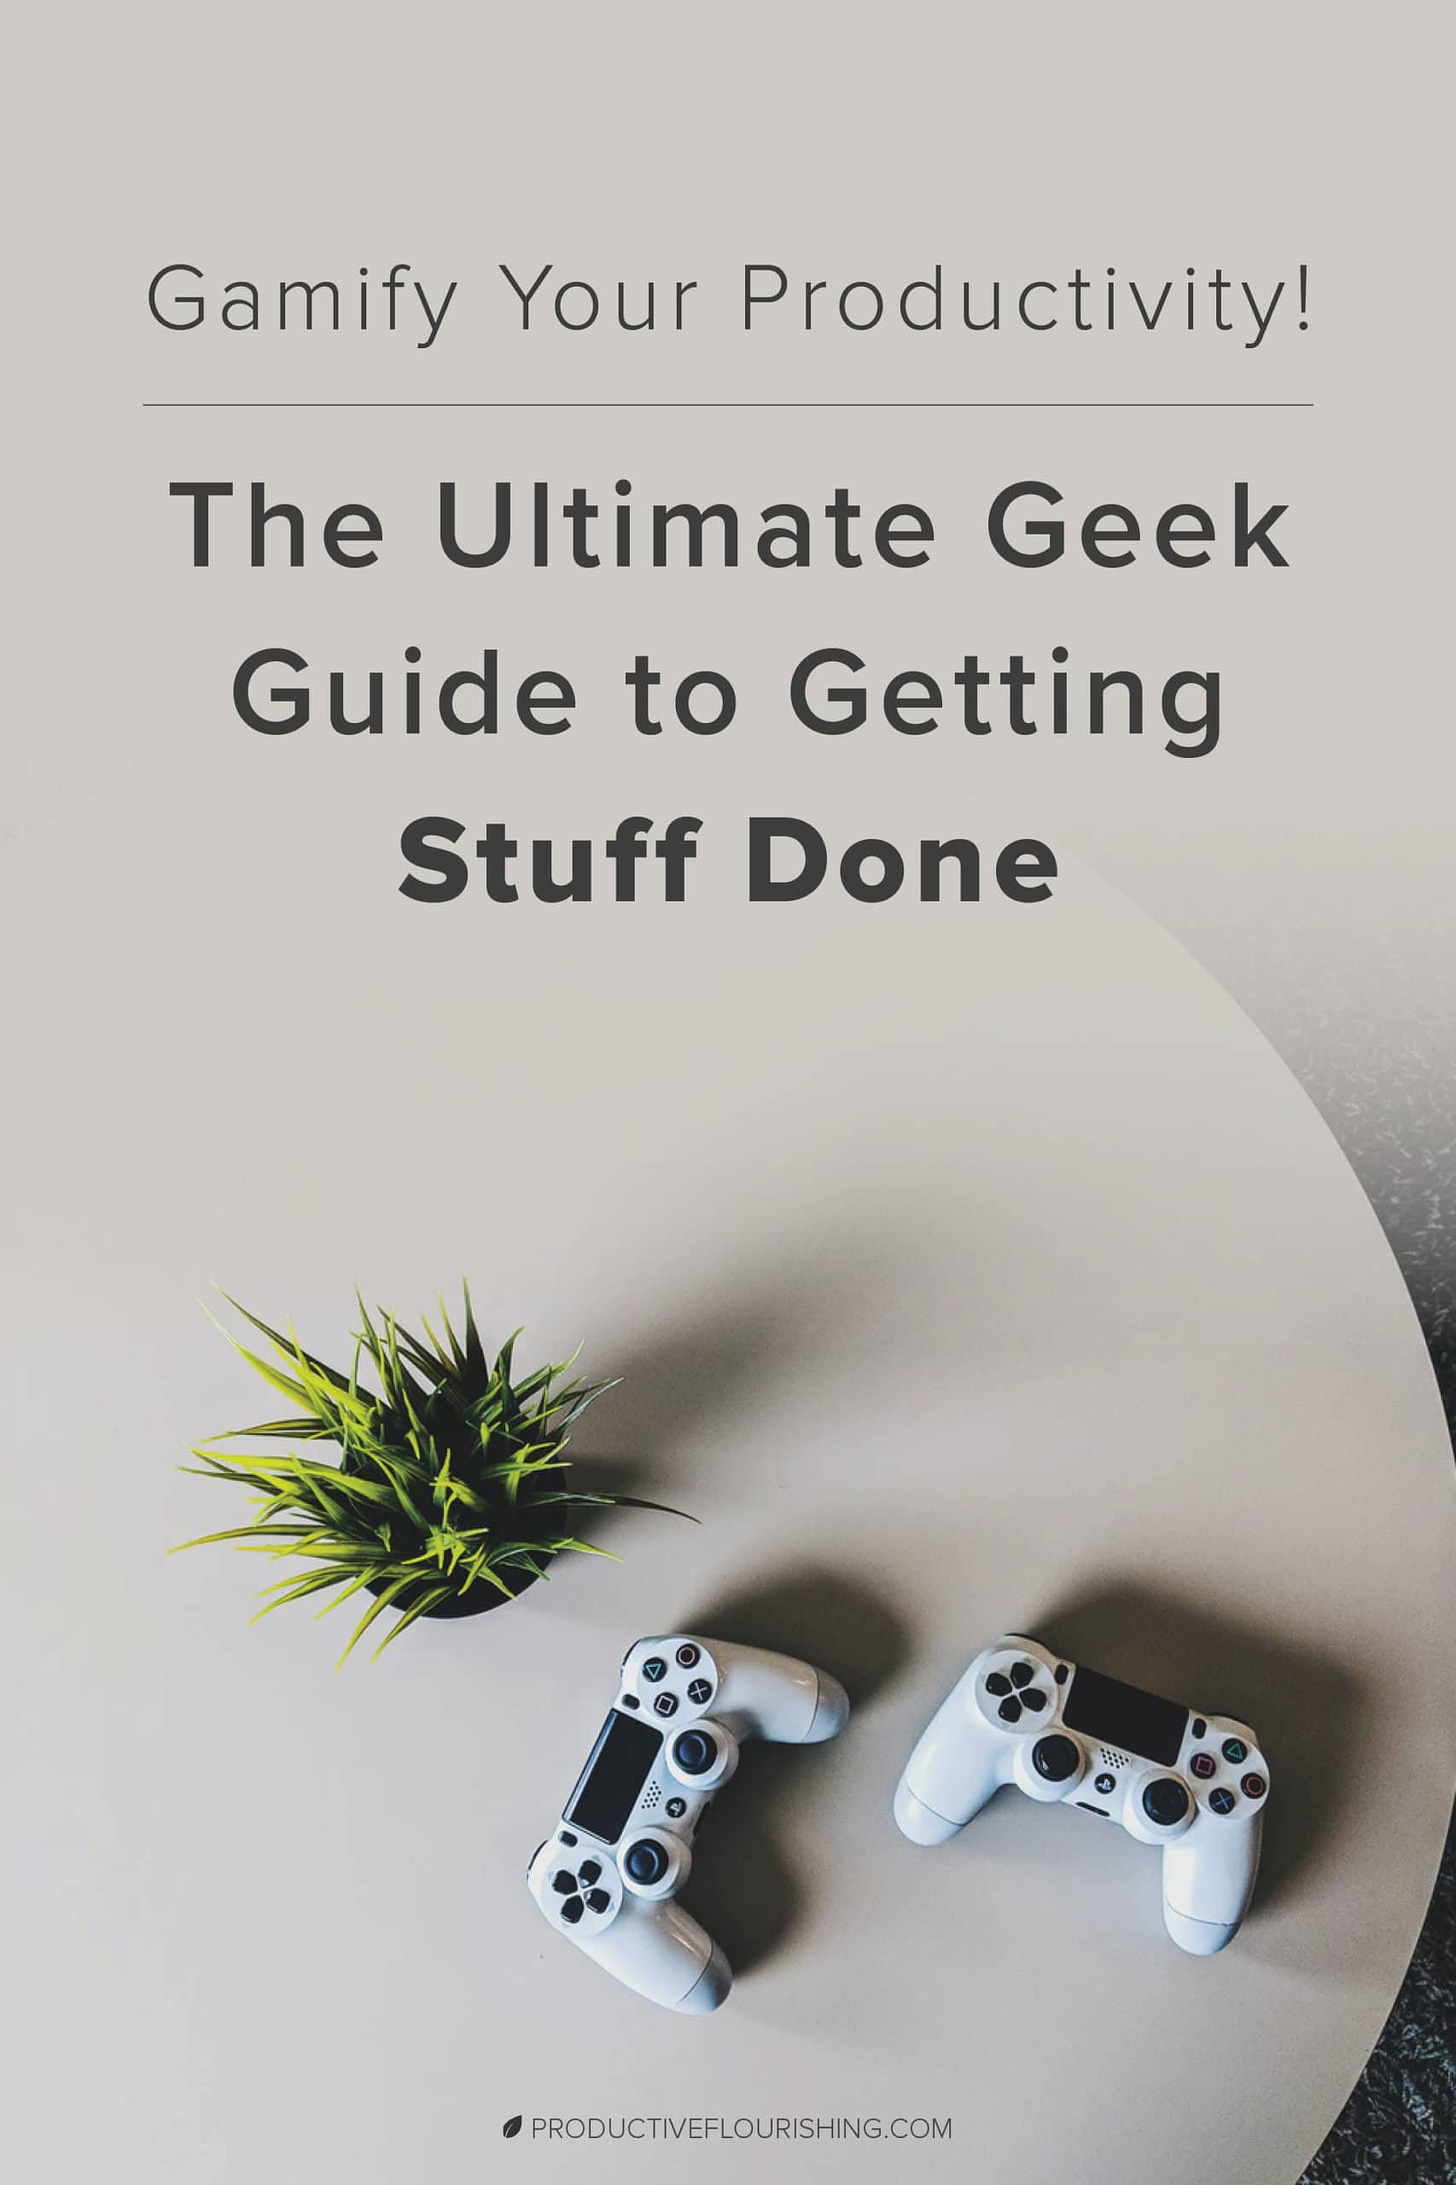 Gamify You Productivity: The Ultimate Geek Guide To Getting Stuff Done! Be the Hero of your systems, projects, needs, and tasks in this fun way. A great concept presented by guest author, Ryan McRae, on how to turn your tasks into a game to build momentum and defeat the Big Bad Evil Genius nemesis of projects. #productivitytips #gamifyyourwork #productiveflourishing